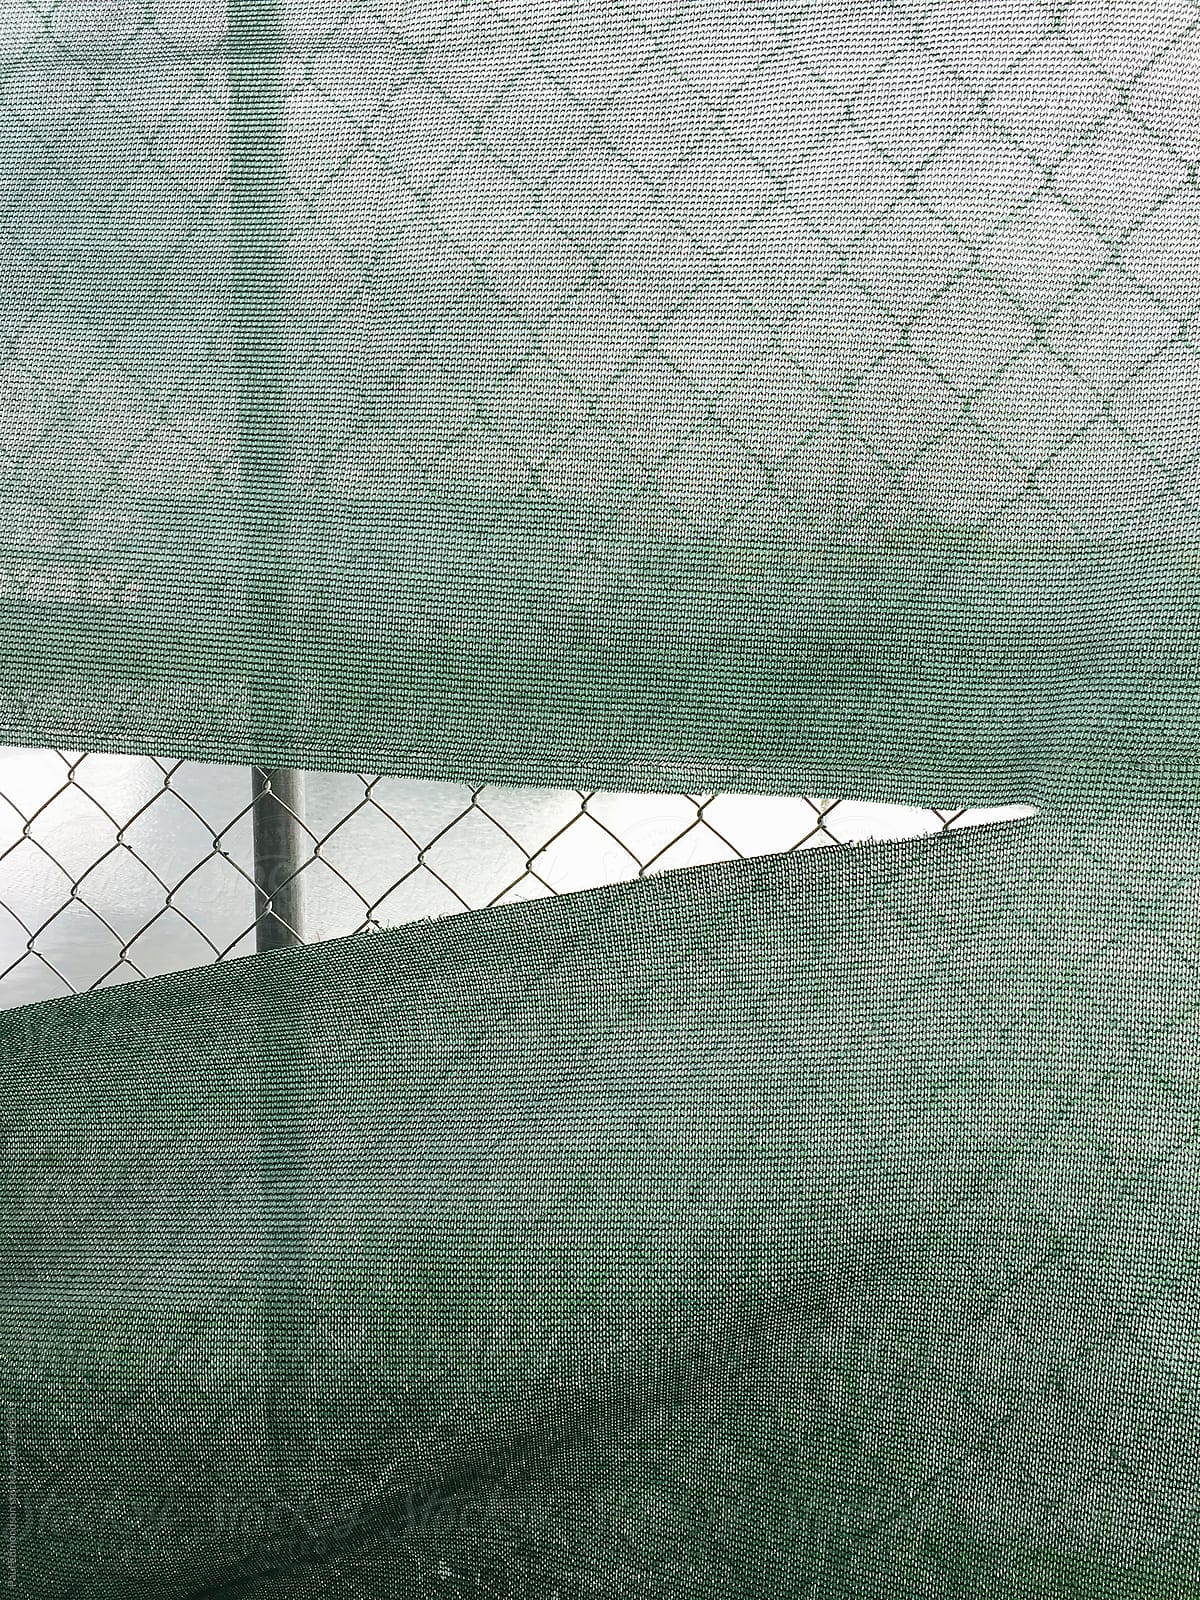 Torn green fabric covering chain-link fence